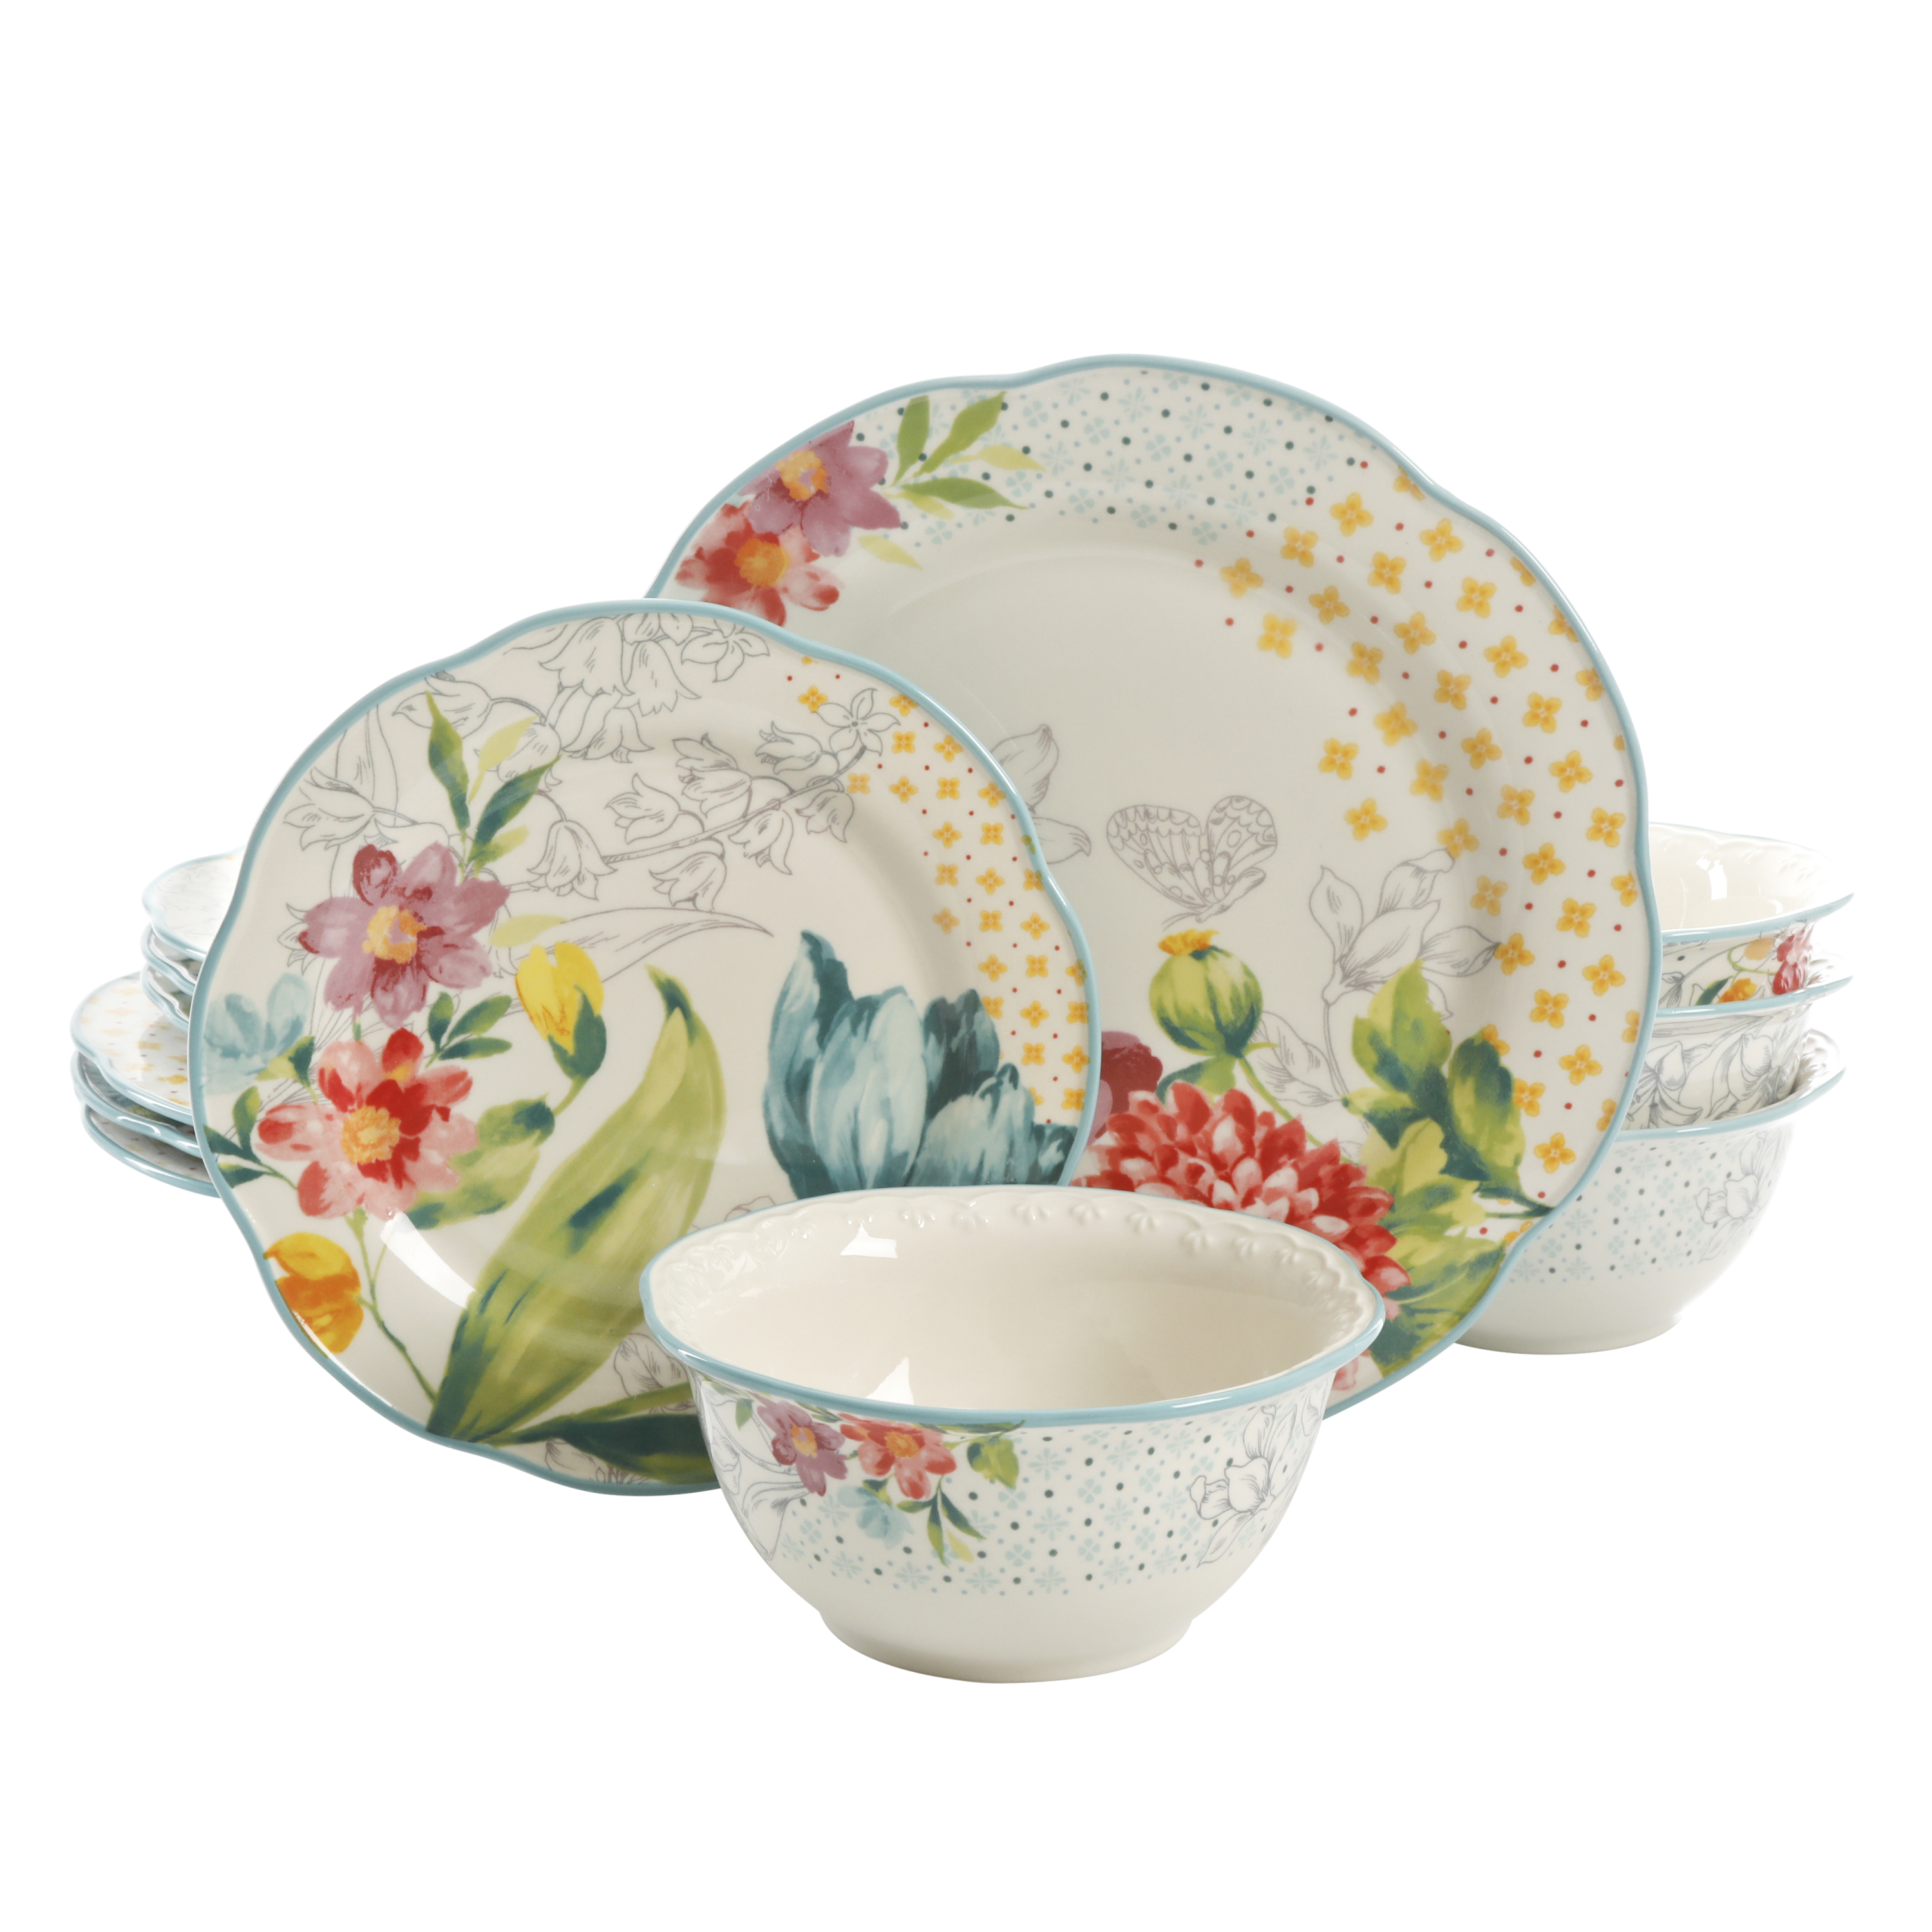 The Pioneer Woman Blooming Bouquet White Ceramic 12-Piece Dinnerware Set - image 1 of 7